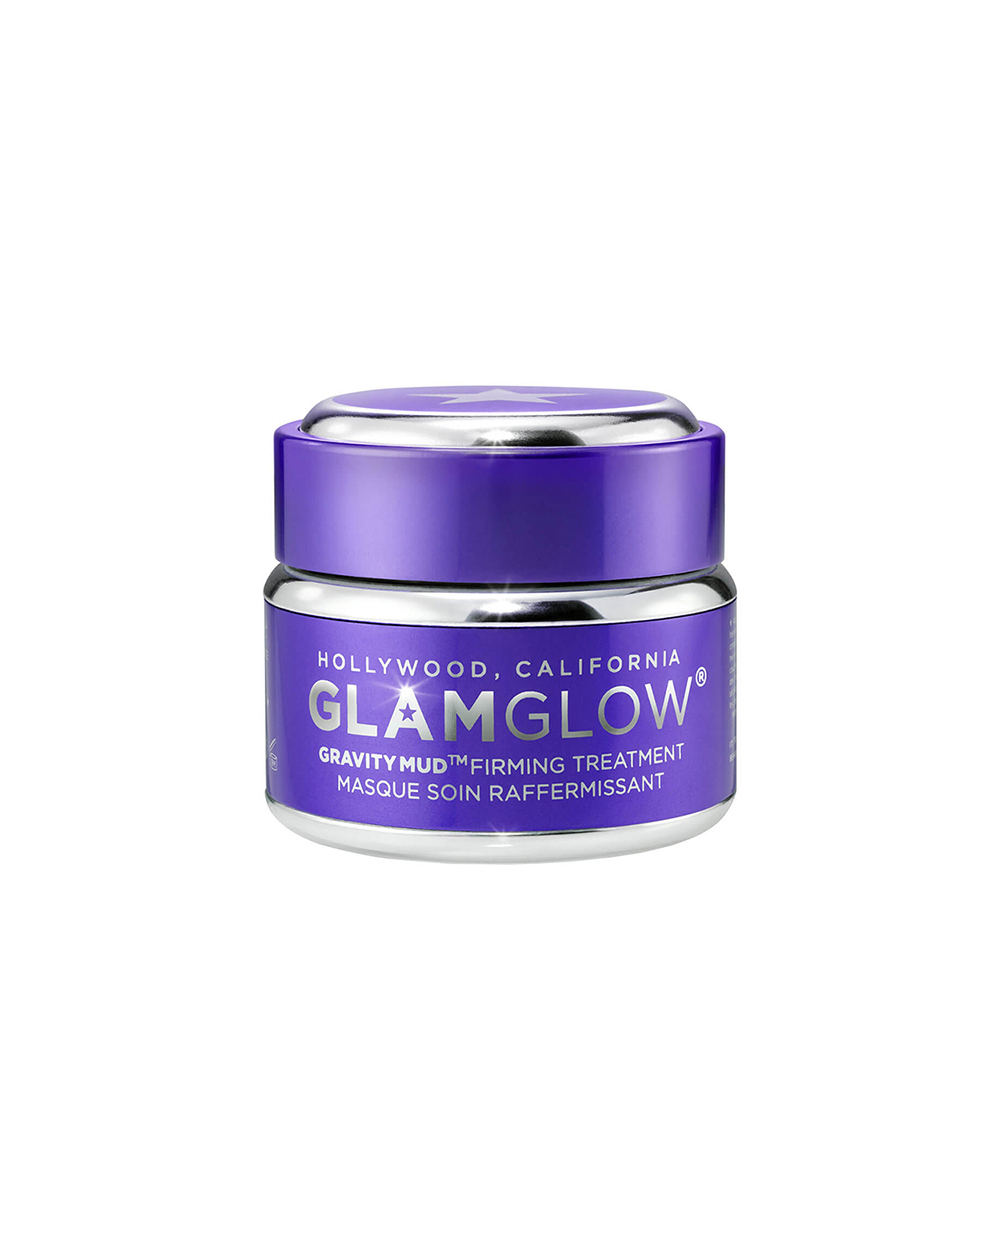 Glam Glow firming mud mask $109 from Mecca